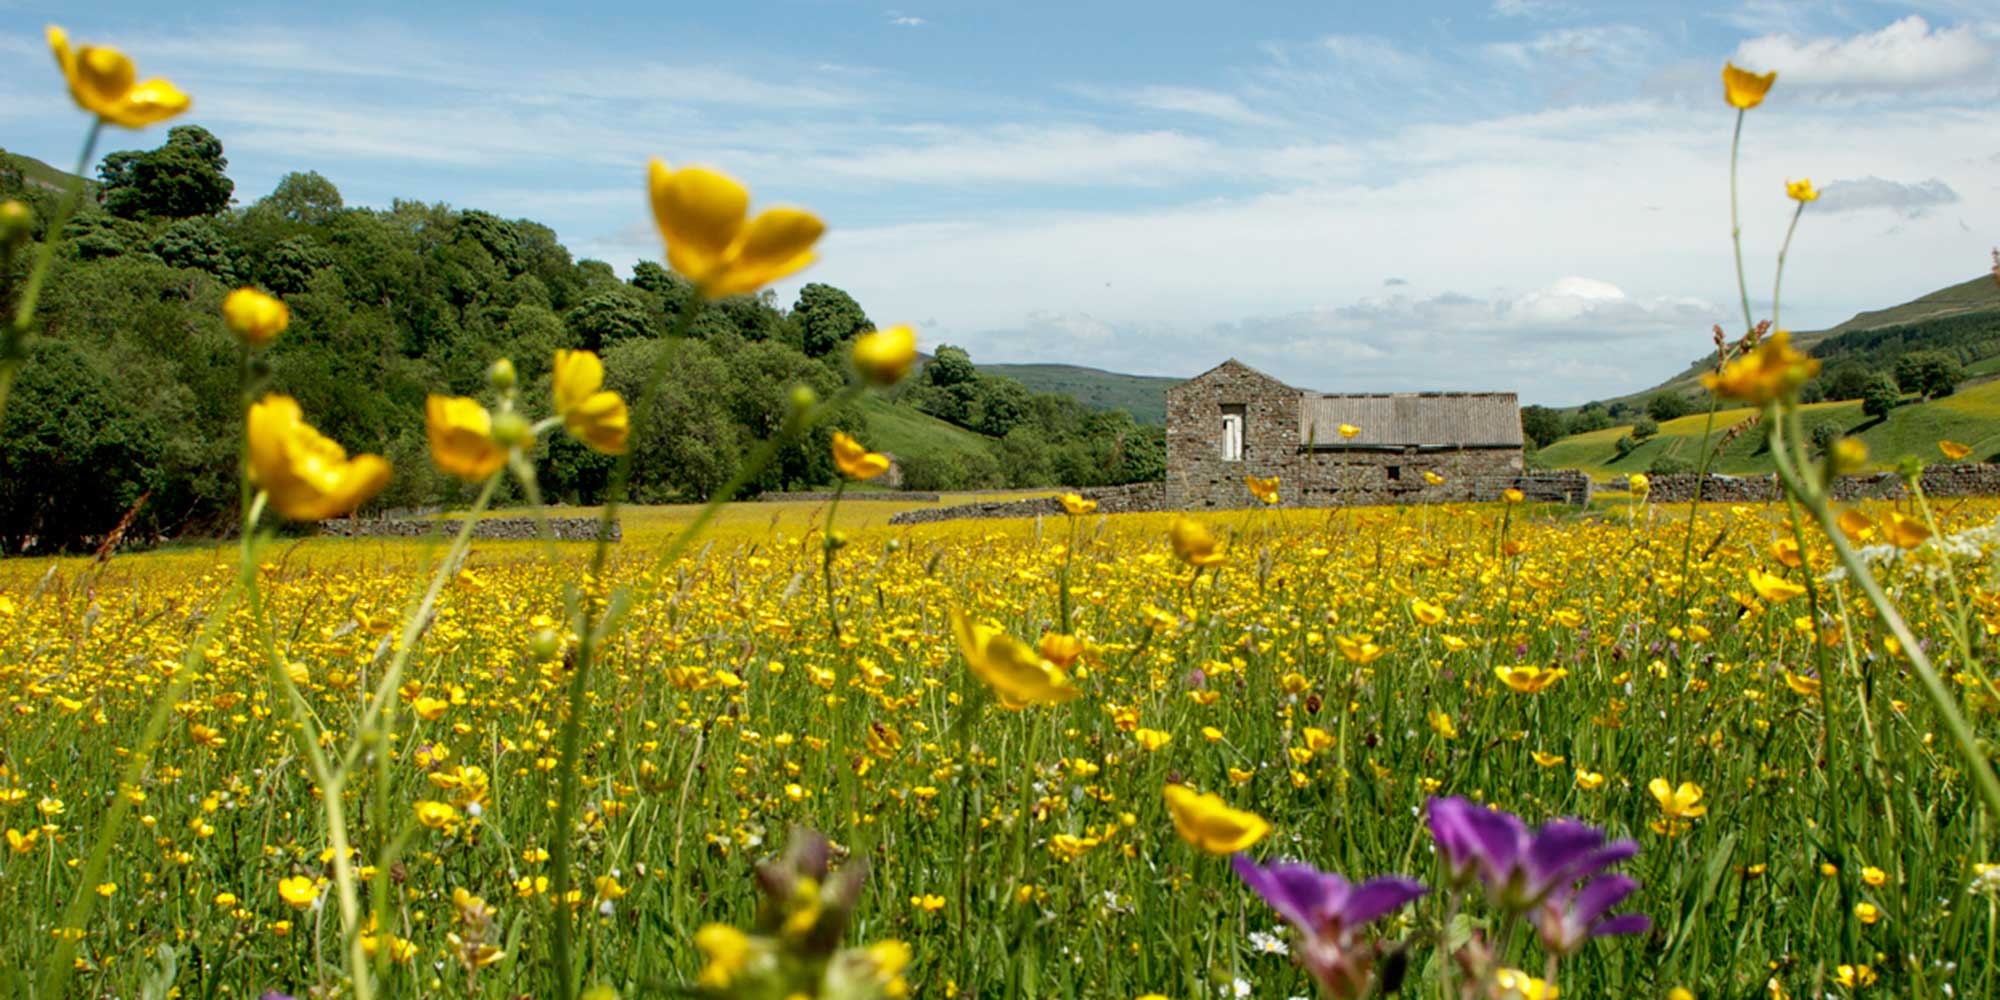 Yellow and purple meadow flowers with a stone barn on the horizon